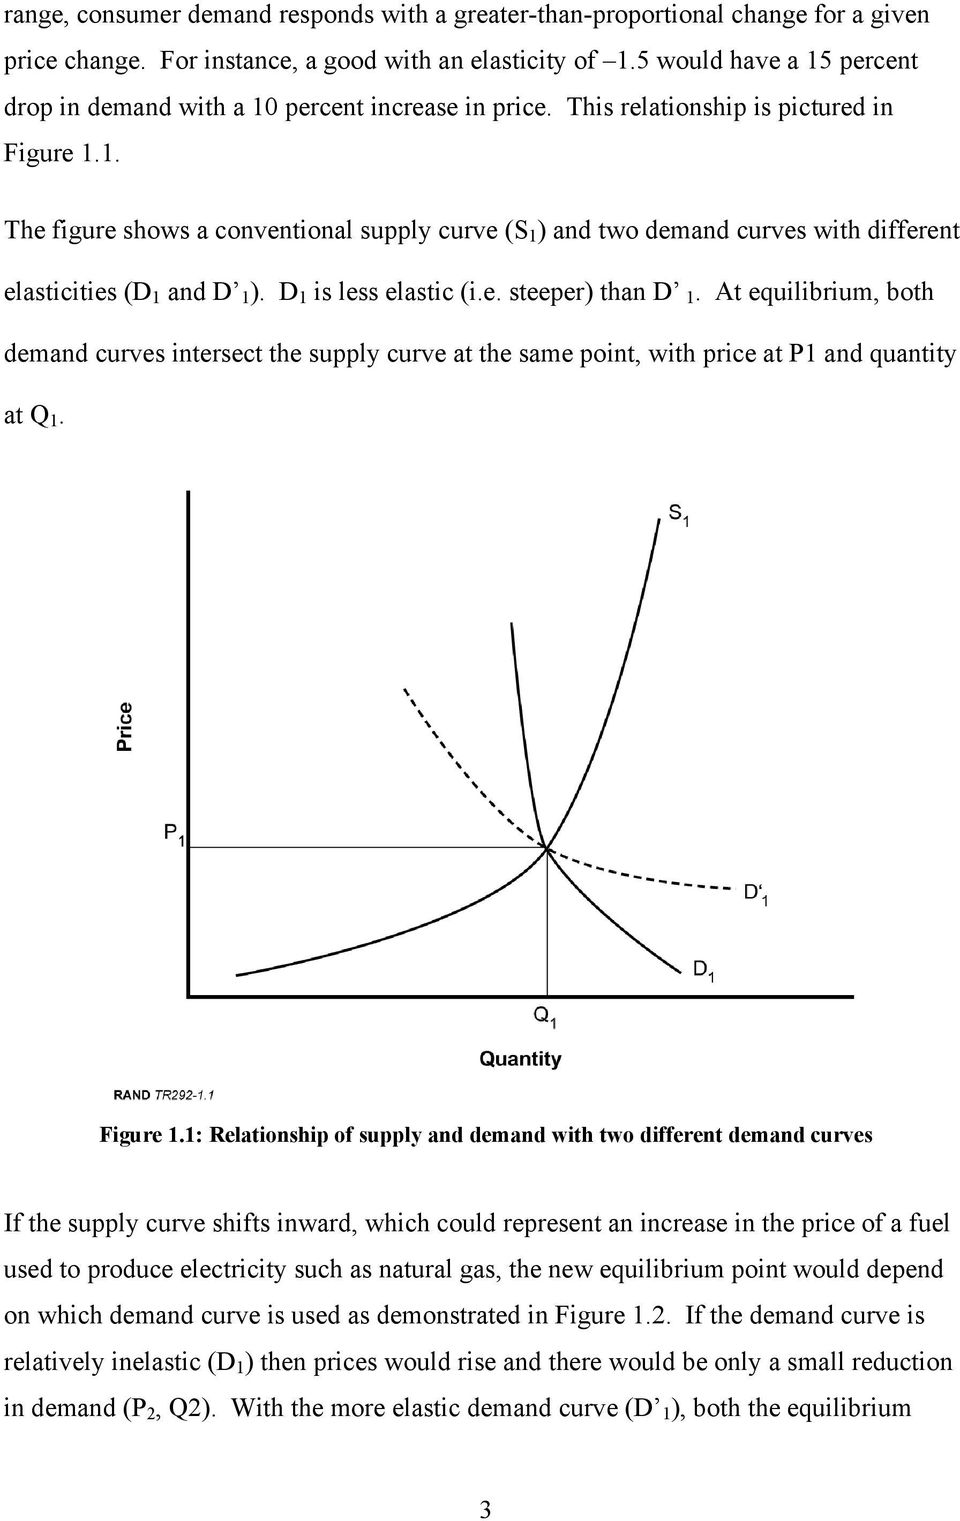 D 1 is less elastic (i.e. steeper) than D 1. At equilibrium, both demand curves intersect the supply curve at the same point, with price at P1 and quantity at Q 1. Figure 1.